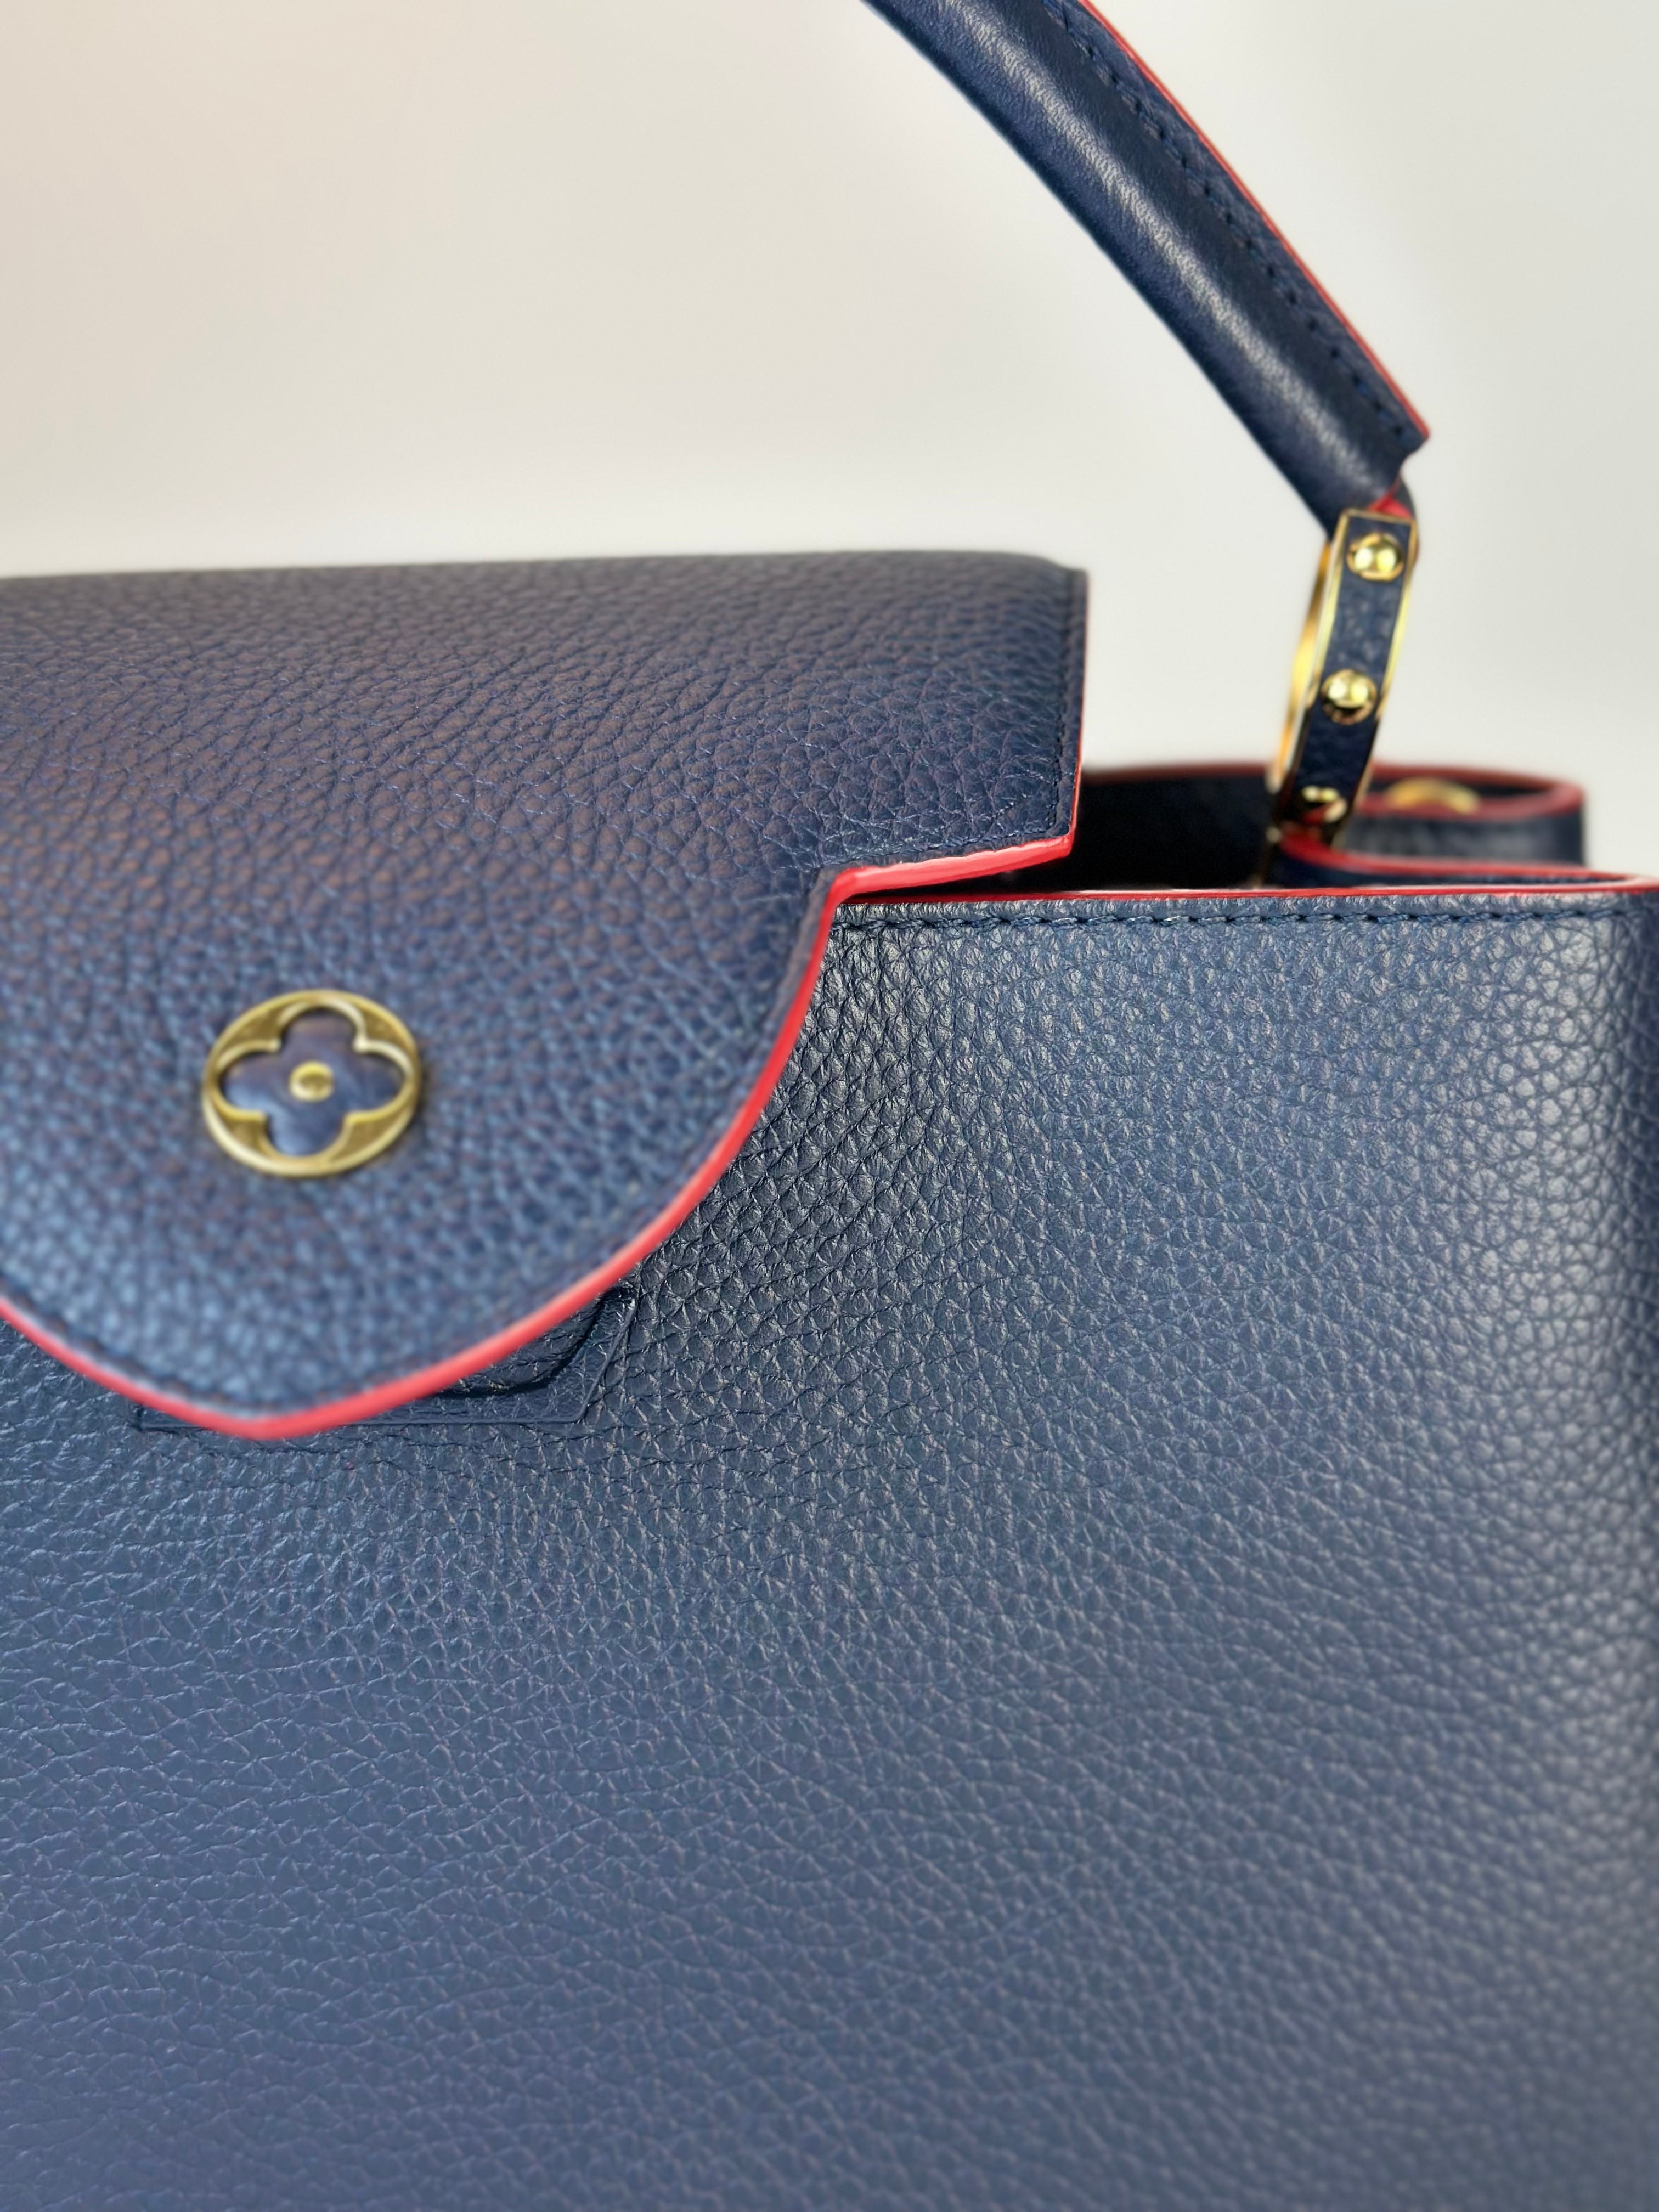 louis vuitton blue and red bag